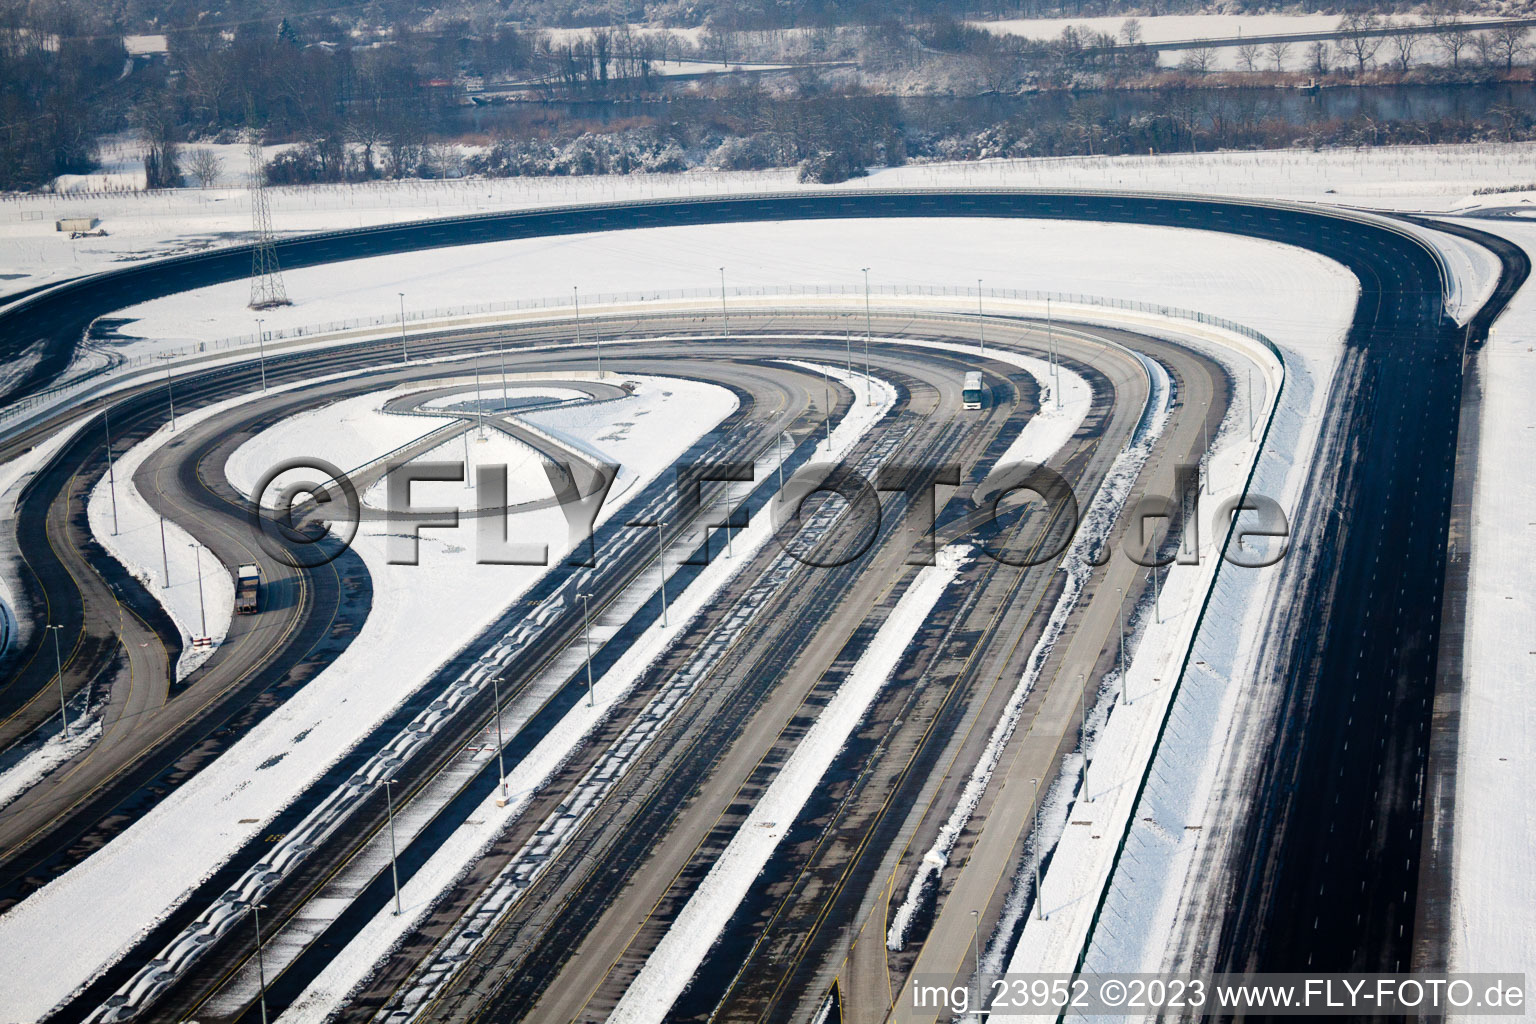 Oberwald industrial area, Daimler truck test track with winter tires? in Wörth am Rhein in the state Rhineland-Palatinate, Germany seen from above